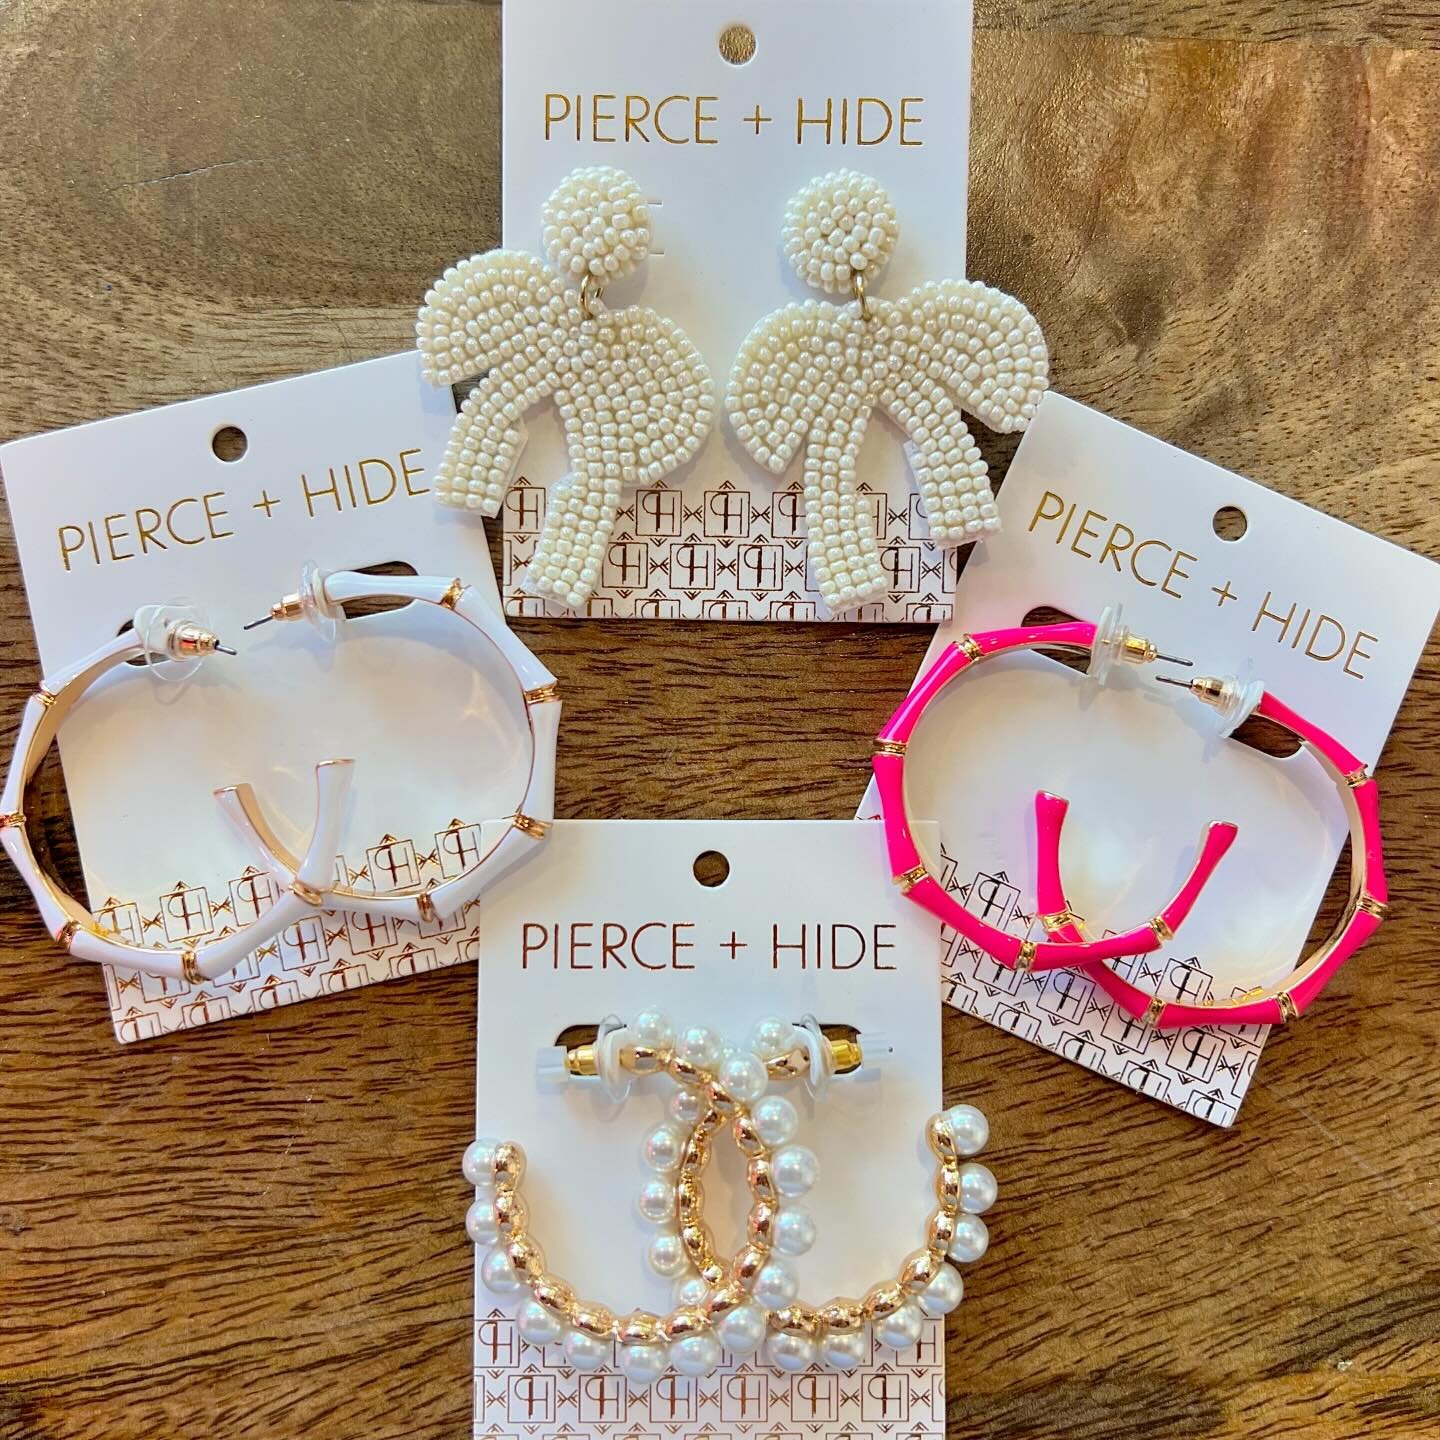 Who doesn&rsquo;t love a @pierceandhide restock ?!?!💁🏼&zwj;♀️😍🌟💍 New styles for summertime are ready to go home with you all! Stop by the gallery this weekend from 11-7 to shop all things new at Studio JBERG!🛍️🩷
&bull;
&bull;
&bull;
#earrings 